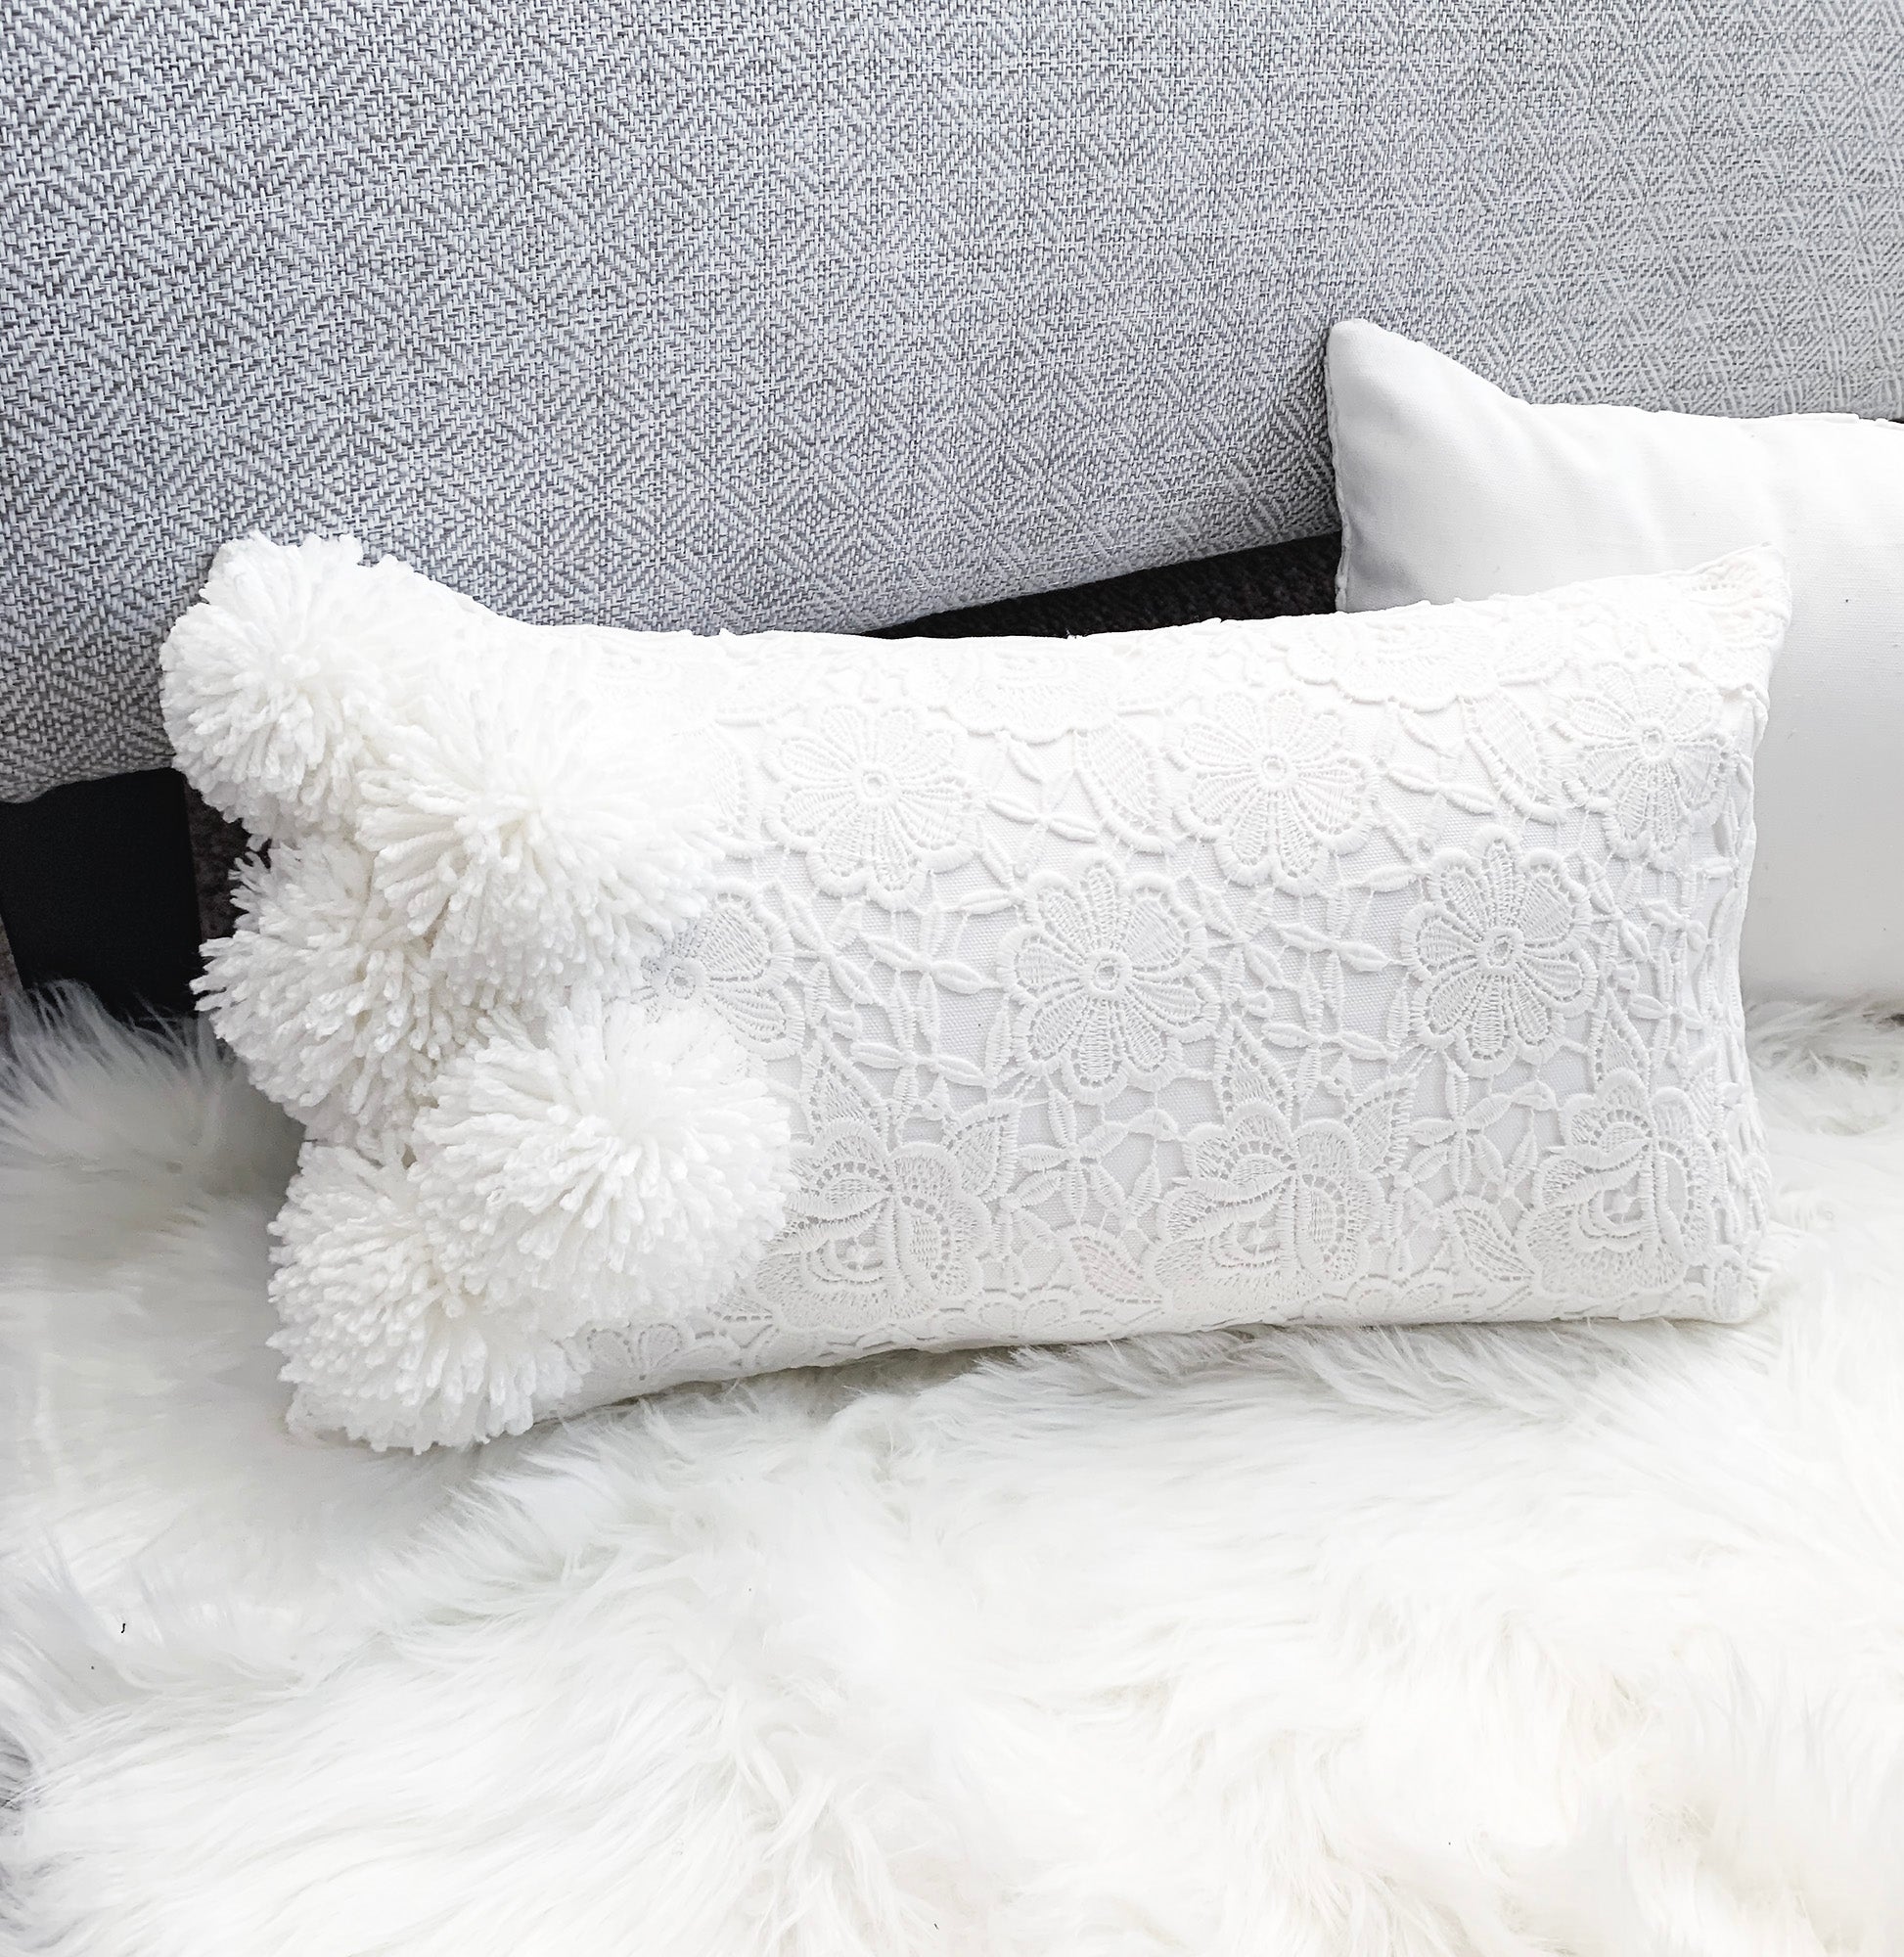 Pom-Pom & Lace Rectangle Pillow cover (Set of 2)